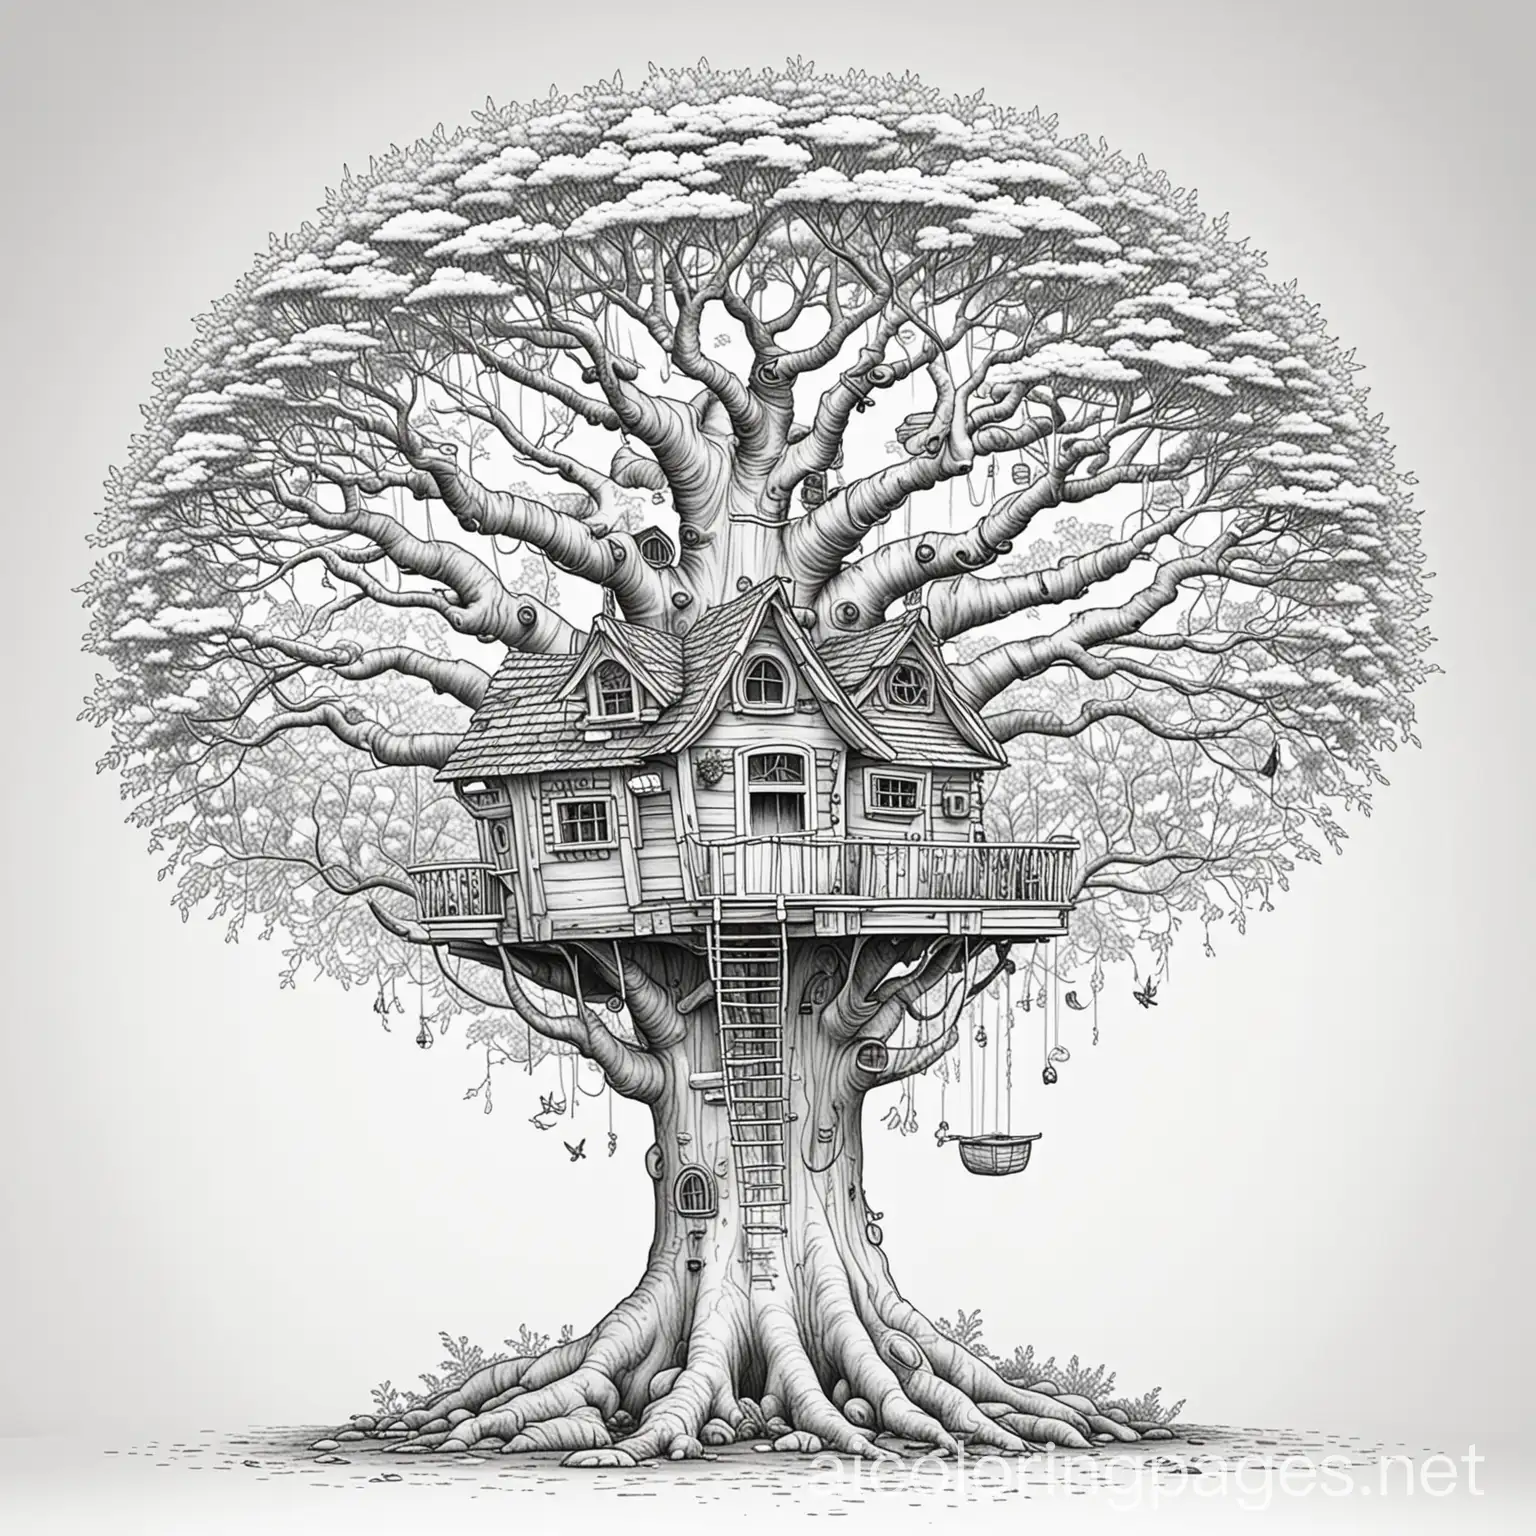 A treehouse village built on the branches of a rainbow tree, Coloring Page, black and white, line art, white background, Simplicity, Ample White Space. The background of the coloring page is plain white to make it easy for young children to color within the lines. The outlines of all the subjects are easy to distinguish, making it simple for kids to color without too much difficulty